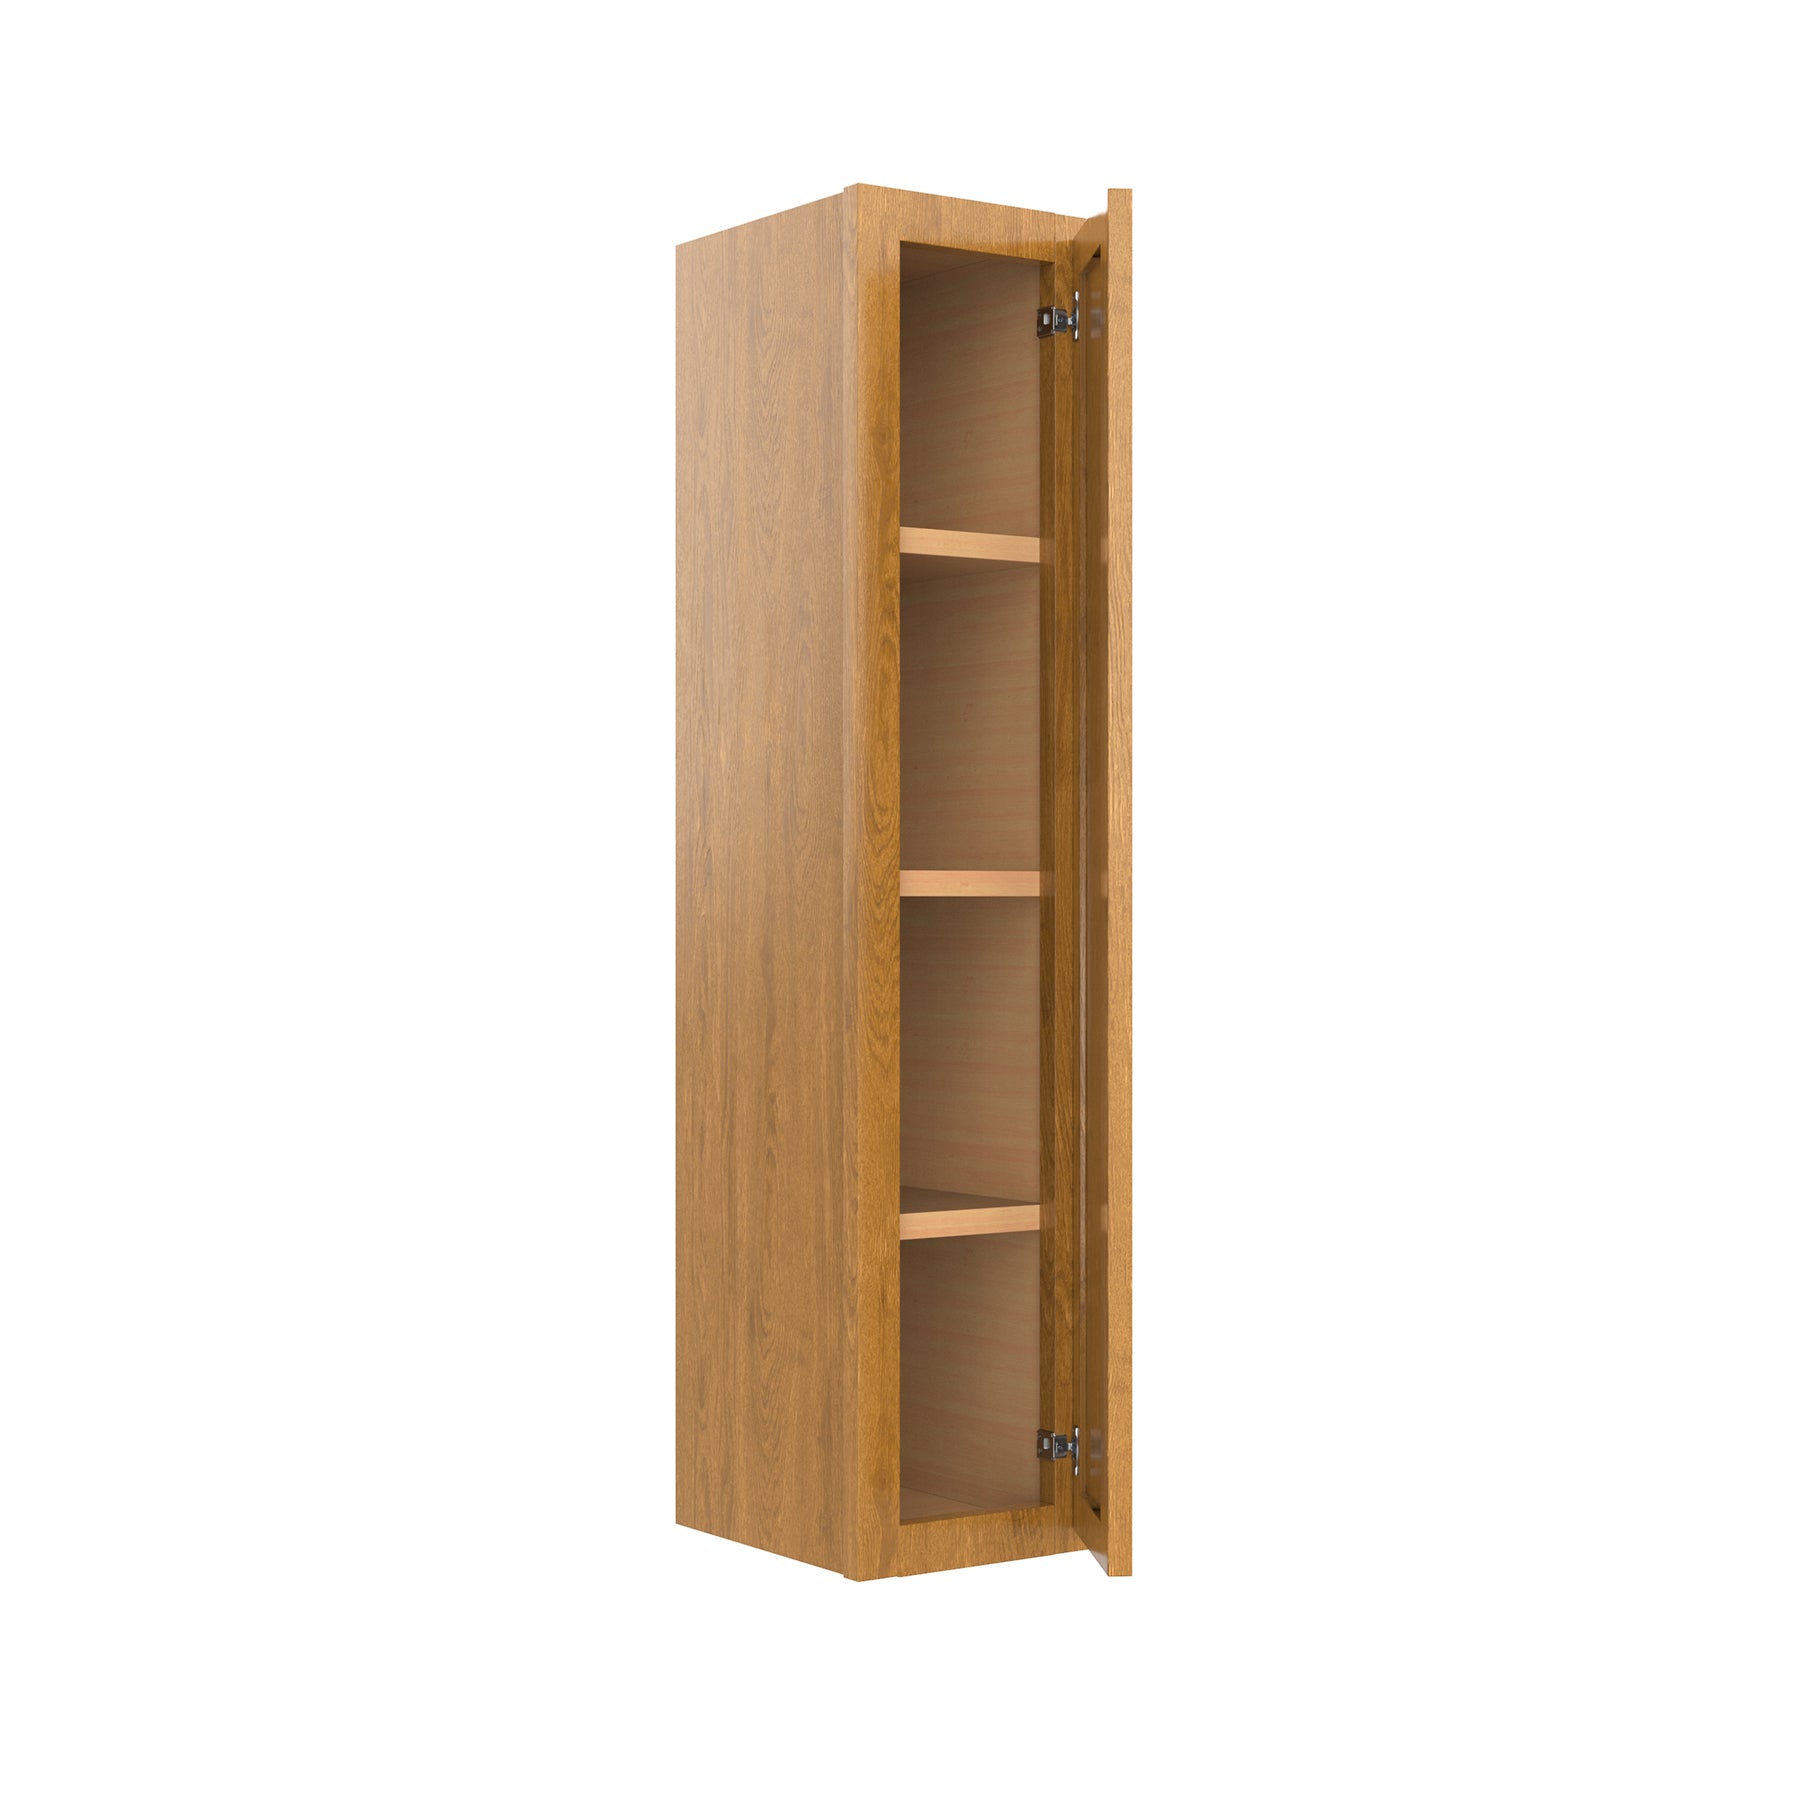 Country Oak 9"W x 42"H Wall Cabinet